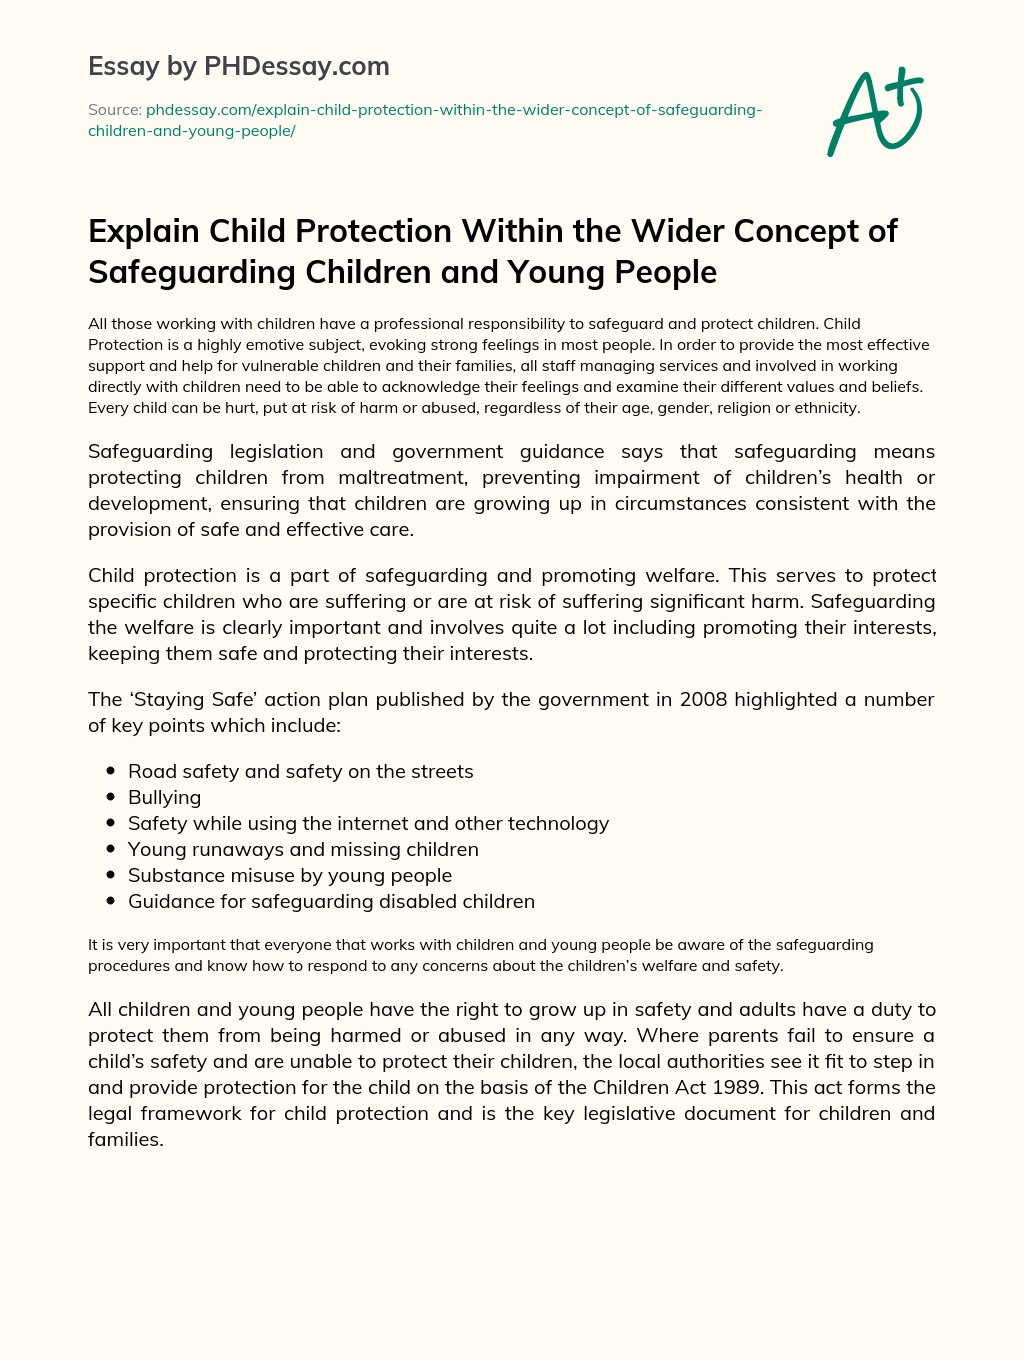 Safe and Protecting Children’ – Importance of Child Protection and Safeguarding in Working with Children essay